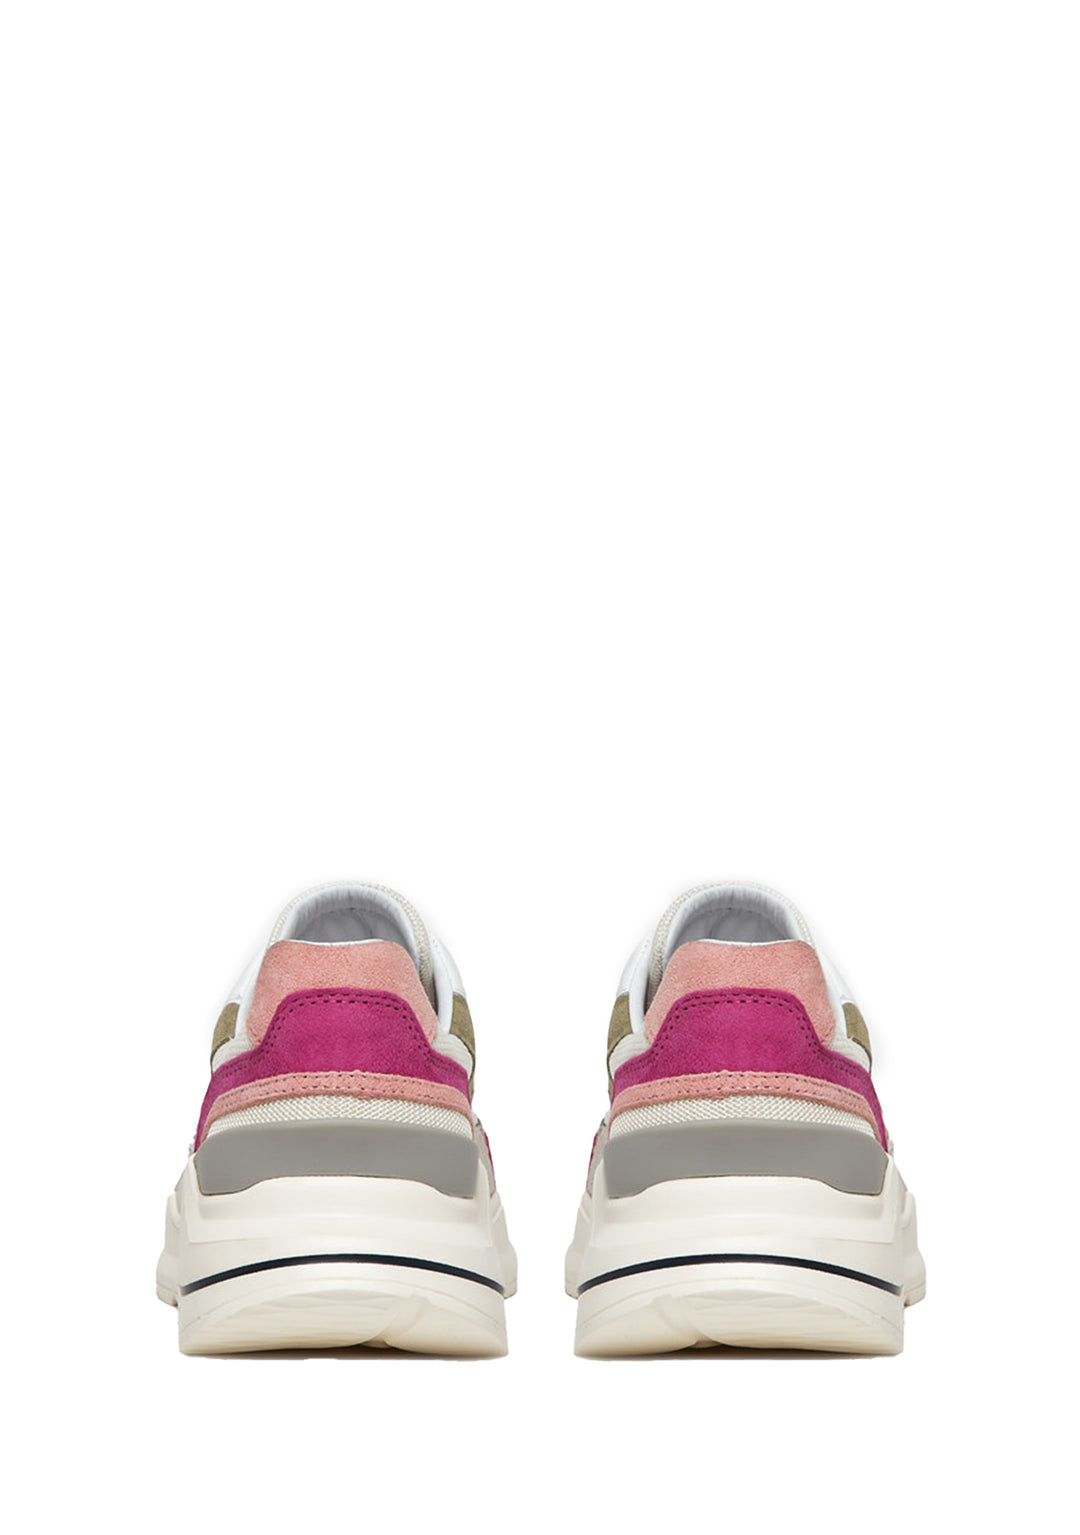 SNEAKERS DONNA Bianco D.a.t.e.